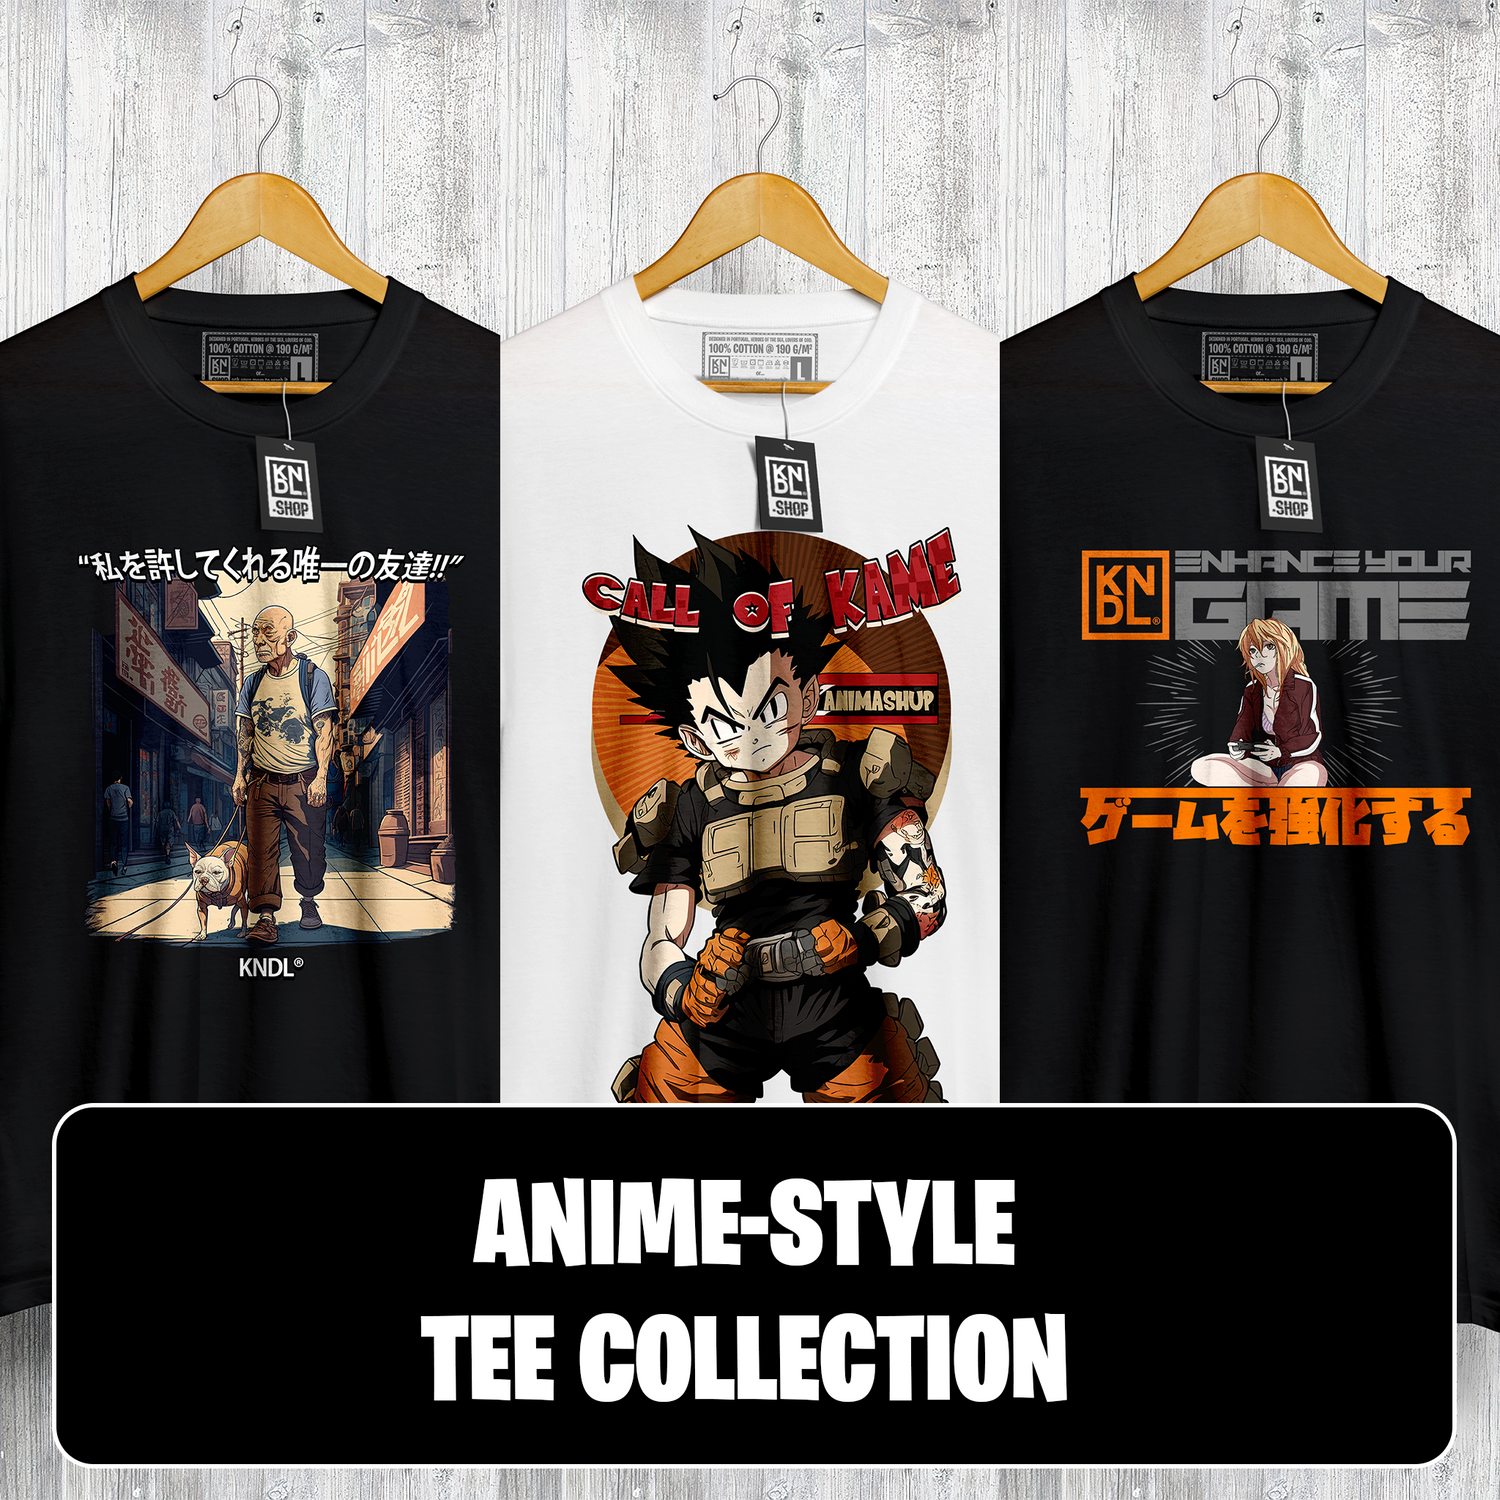 Anime-Style Tee Collection by KNDL®